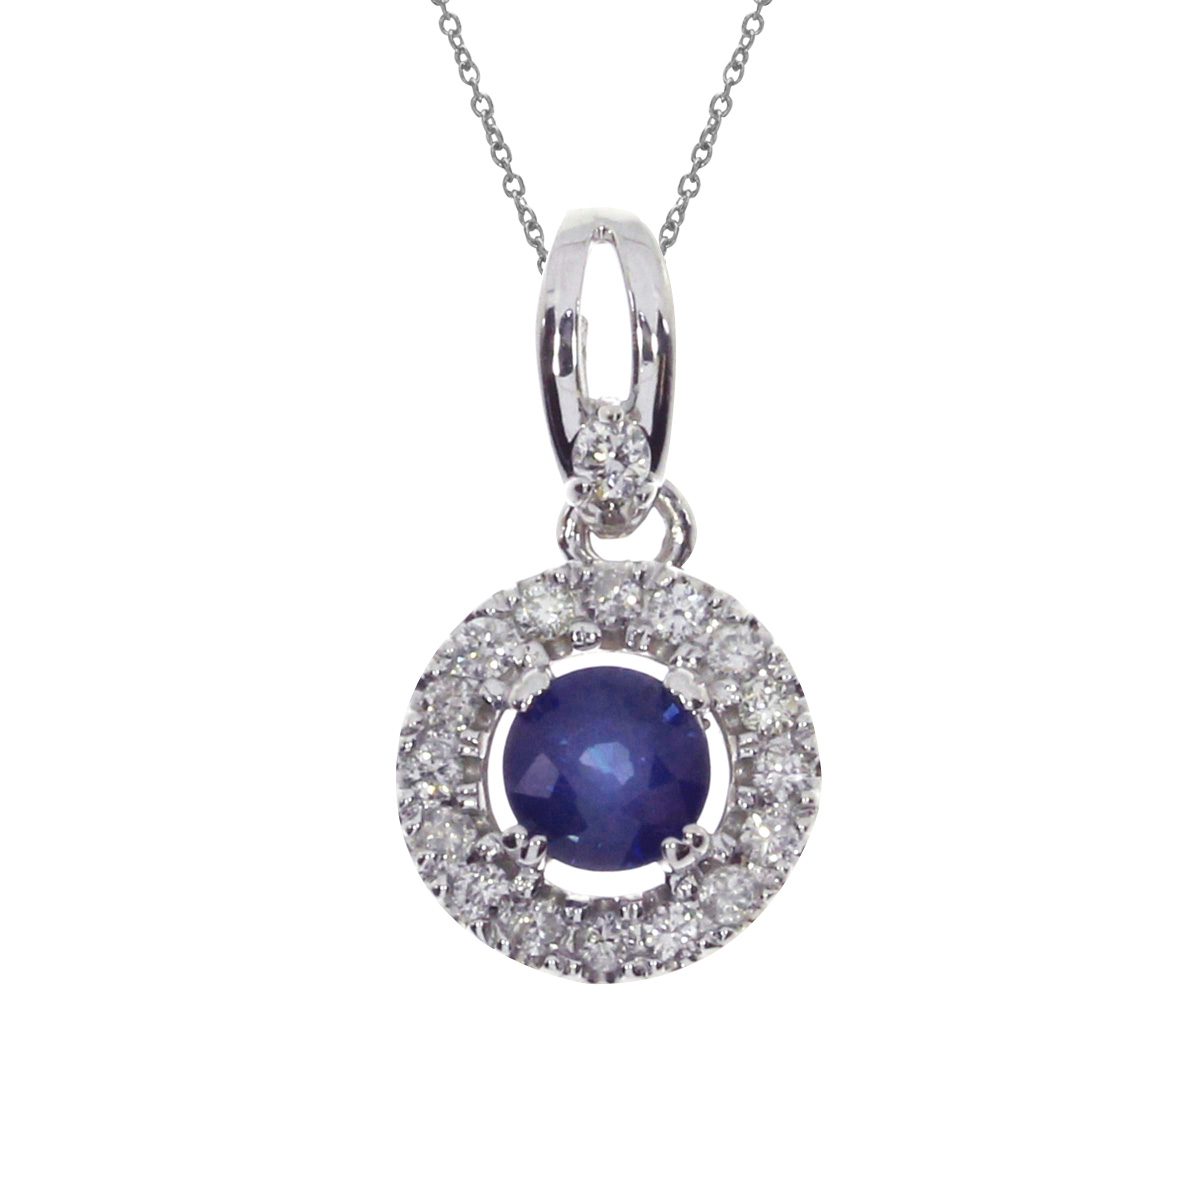 A halo of beautiful diamonds surround a genuine 5 mm sapphire all set in 14k white gold.